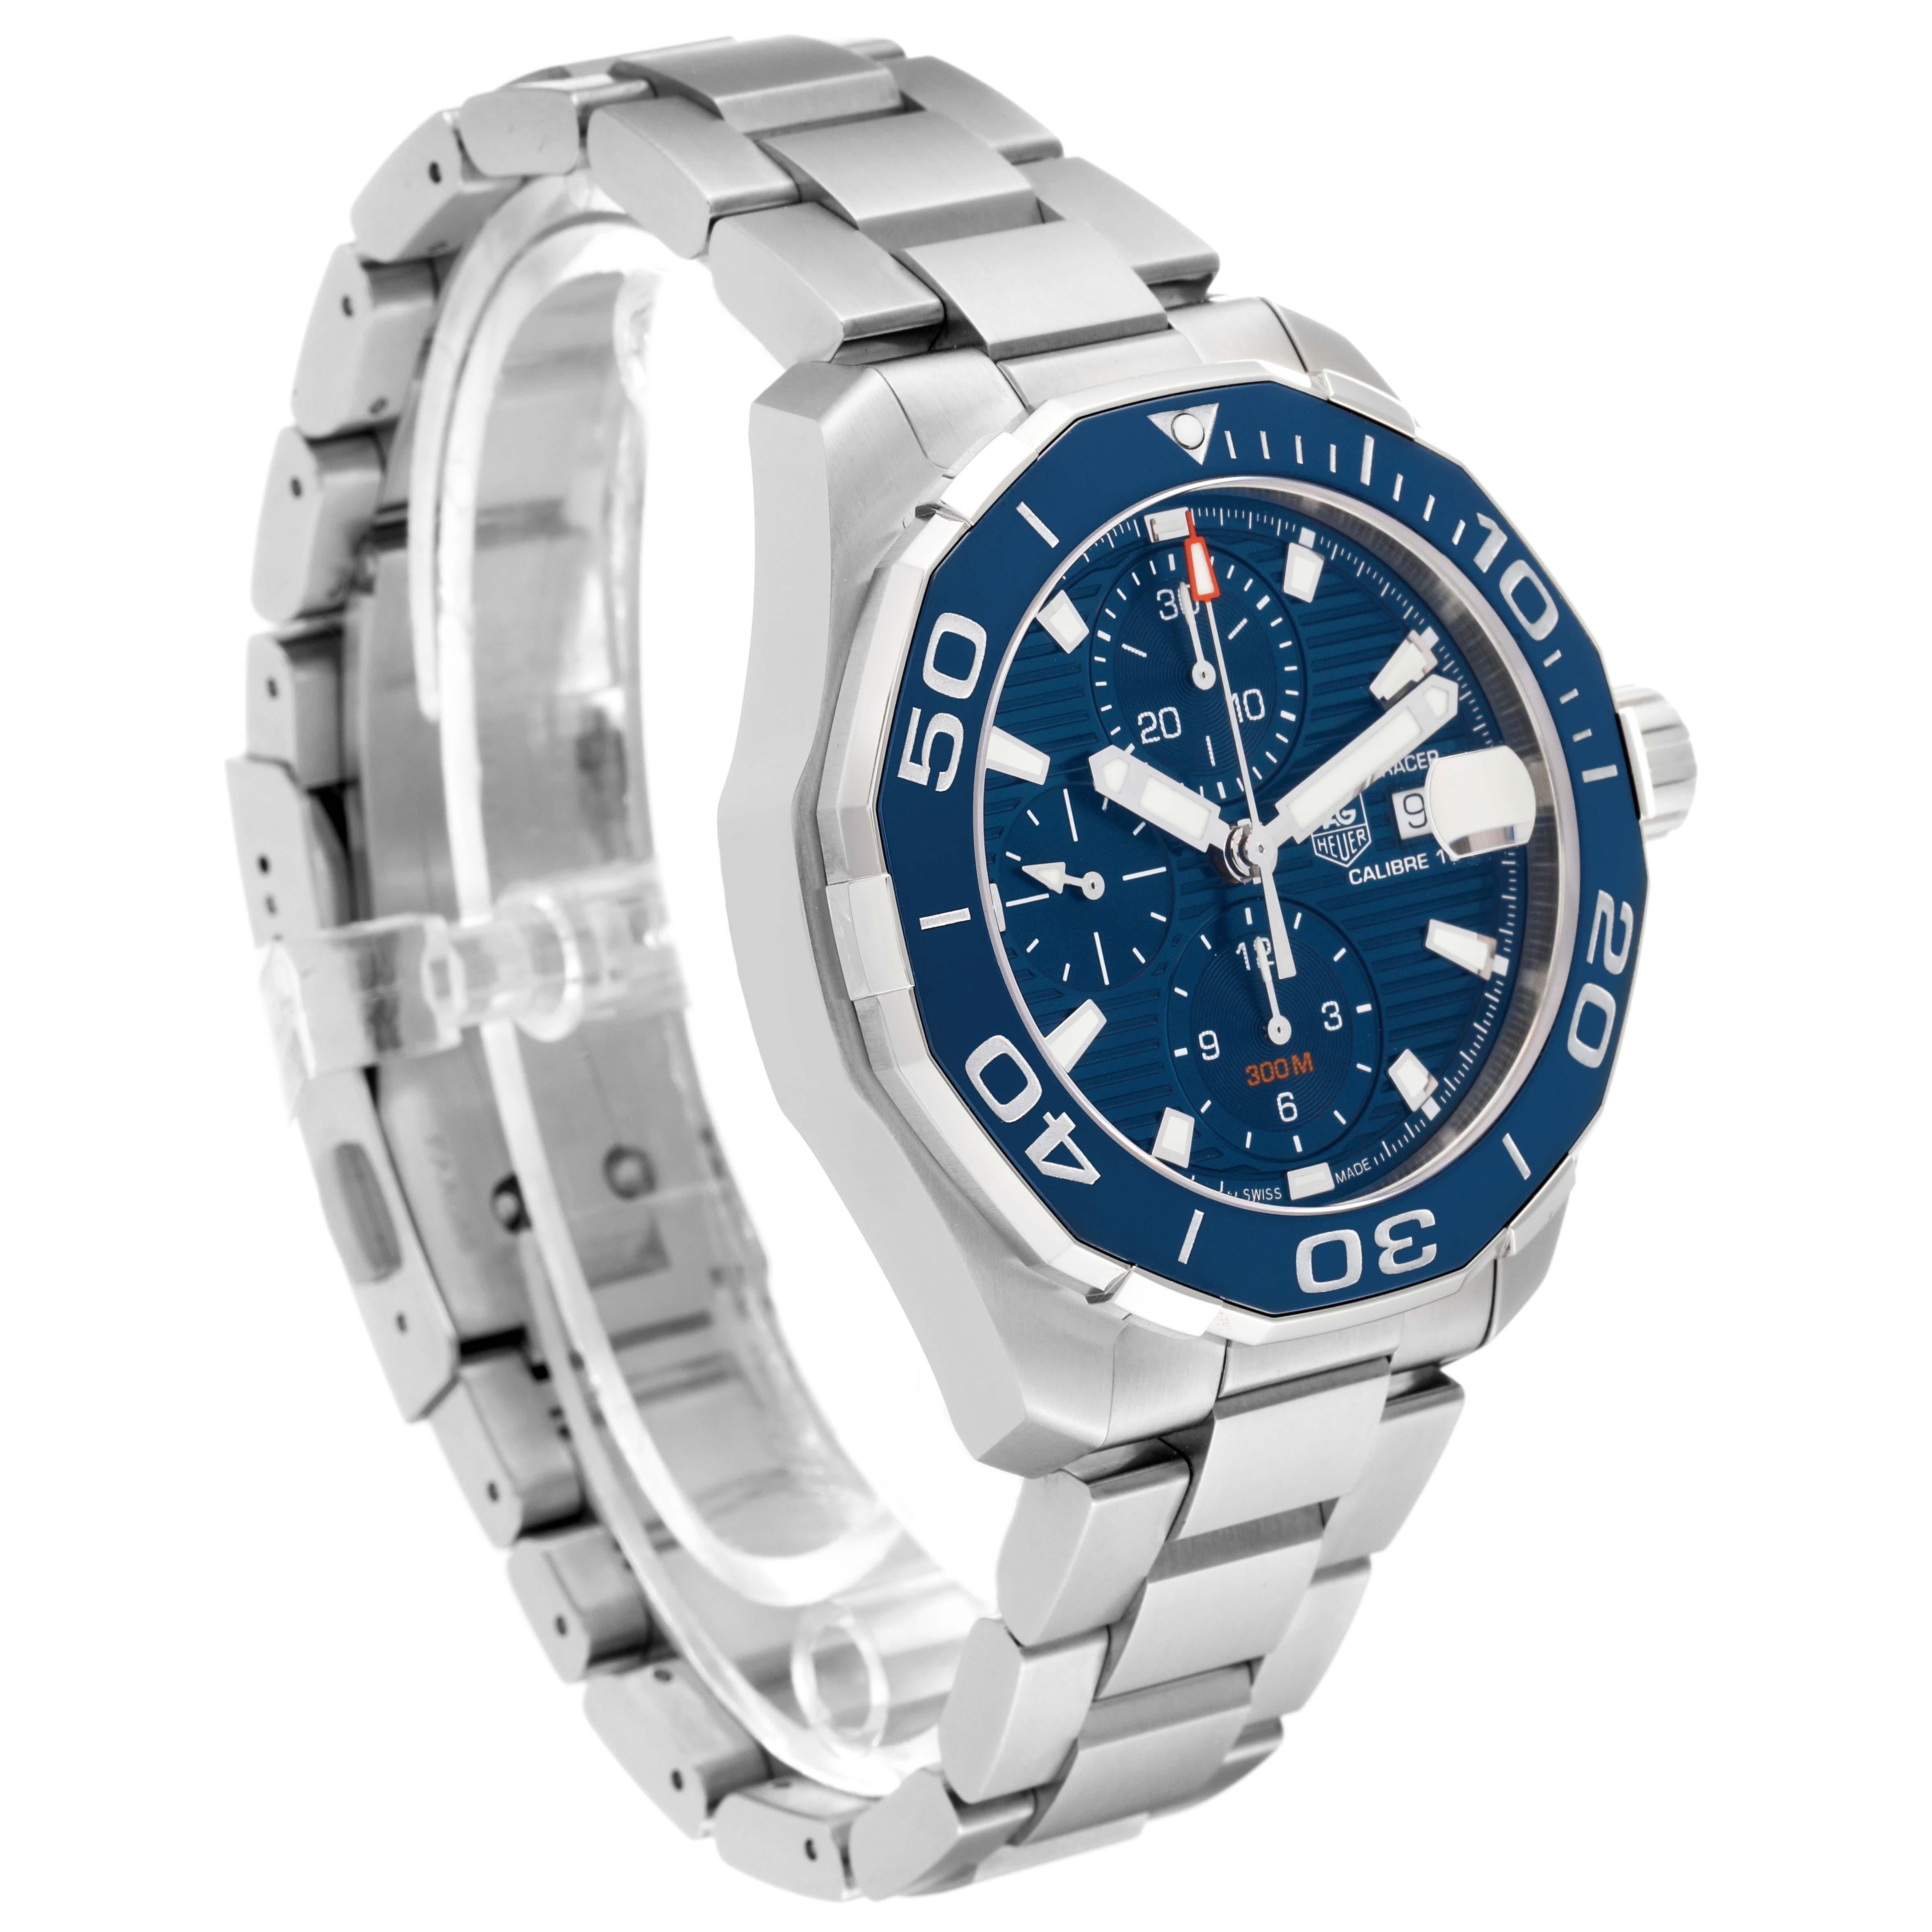 Tag Heuer Aquaracer Blue Dial Steel Chronograph Mens Watch CAY211B Box Card. Automatic self-winding movement. Stainless steel case 43 mm in diameter. Case Thickness: 15 mm. Uni-directional rotating stainless steel bezel with a blue ceramic top ring.